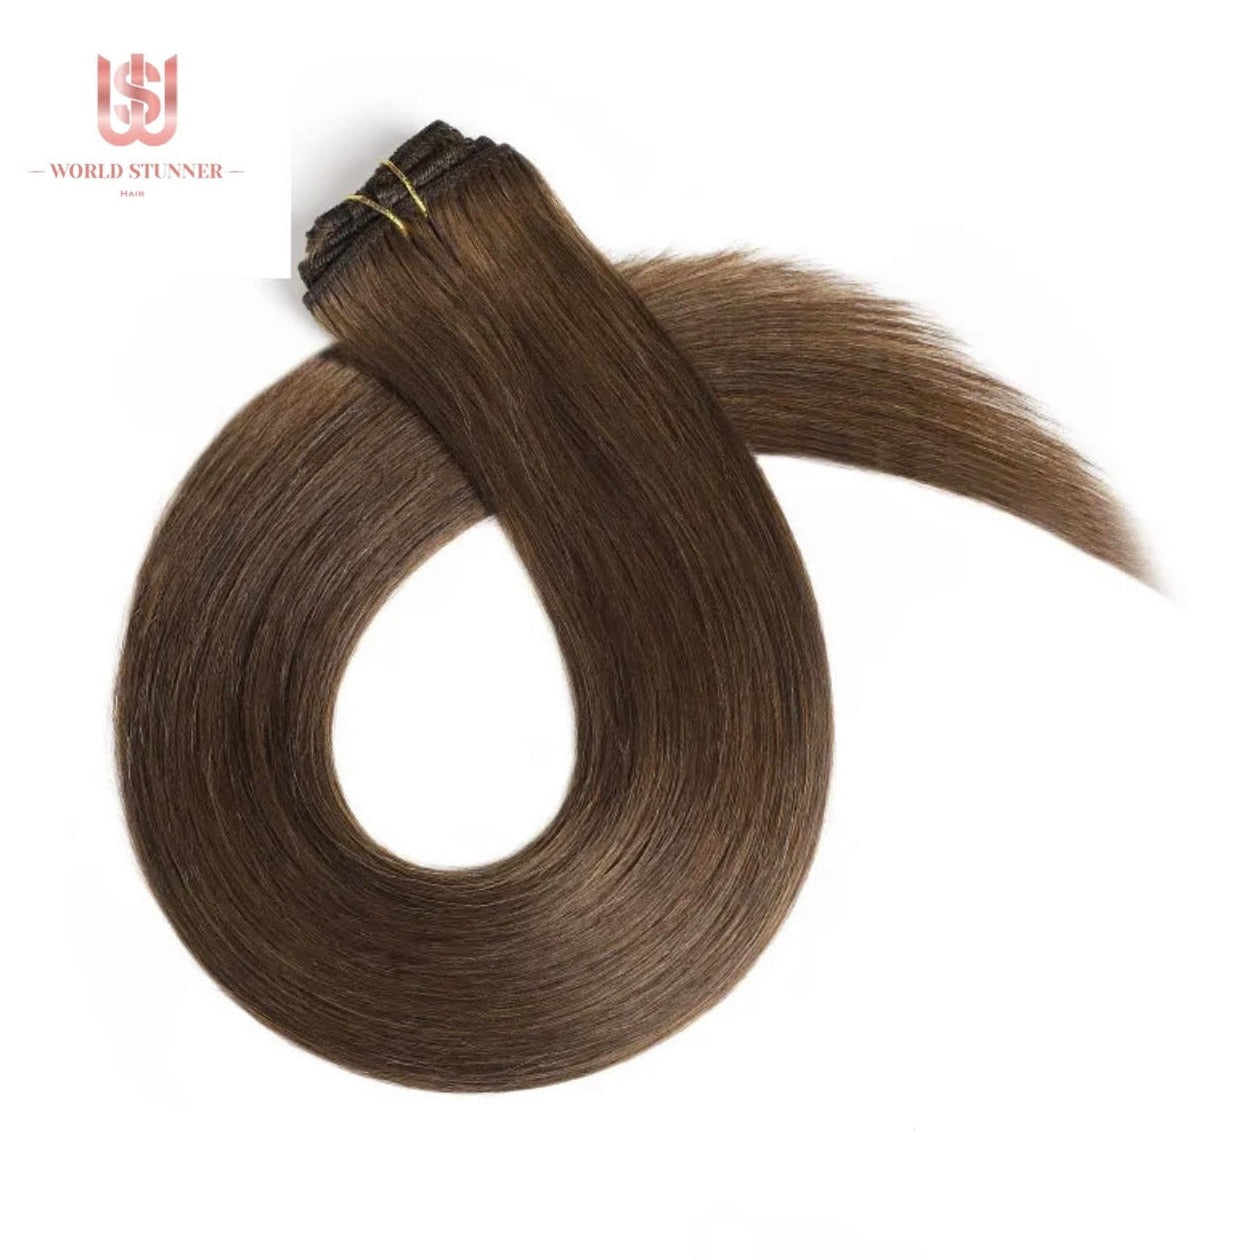 6A# BROWN - SUPER THICK 22” 7 PIECE STRAIGHT CLIPS IN HAIR EXTENSIONS